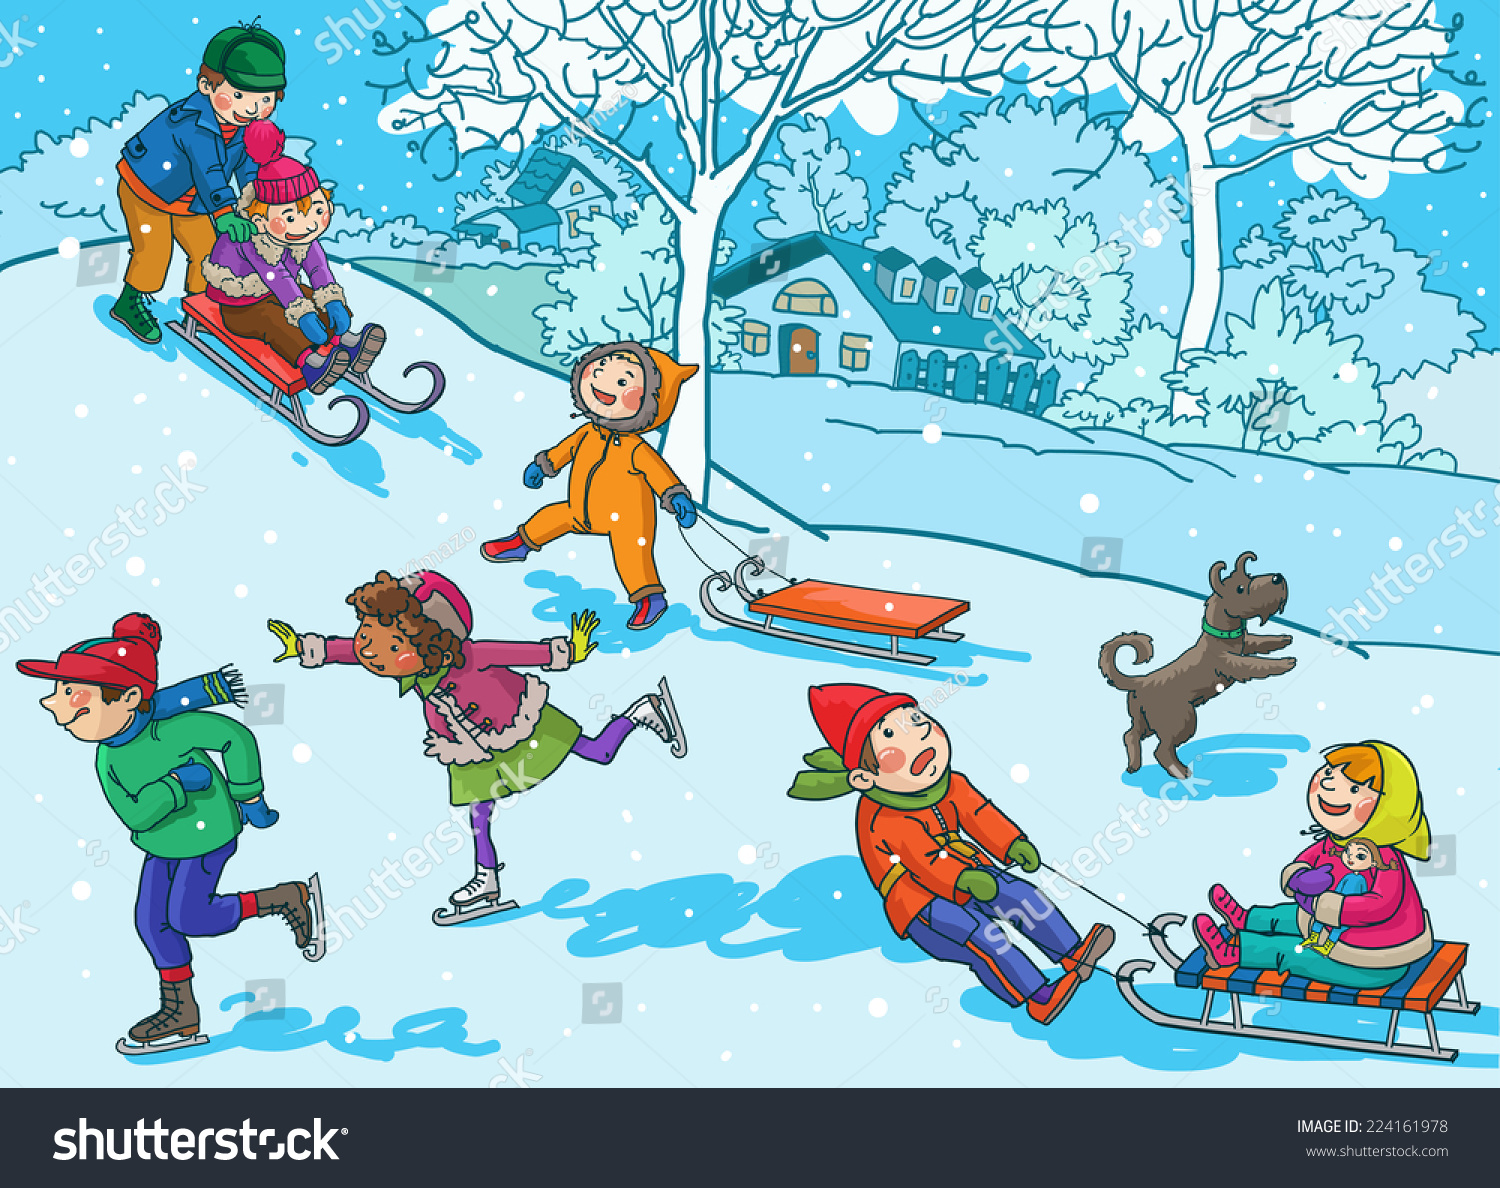 winter games clipart - photo #38